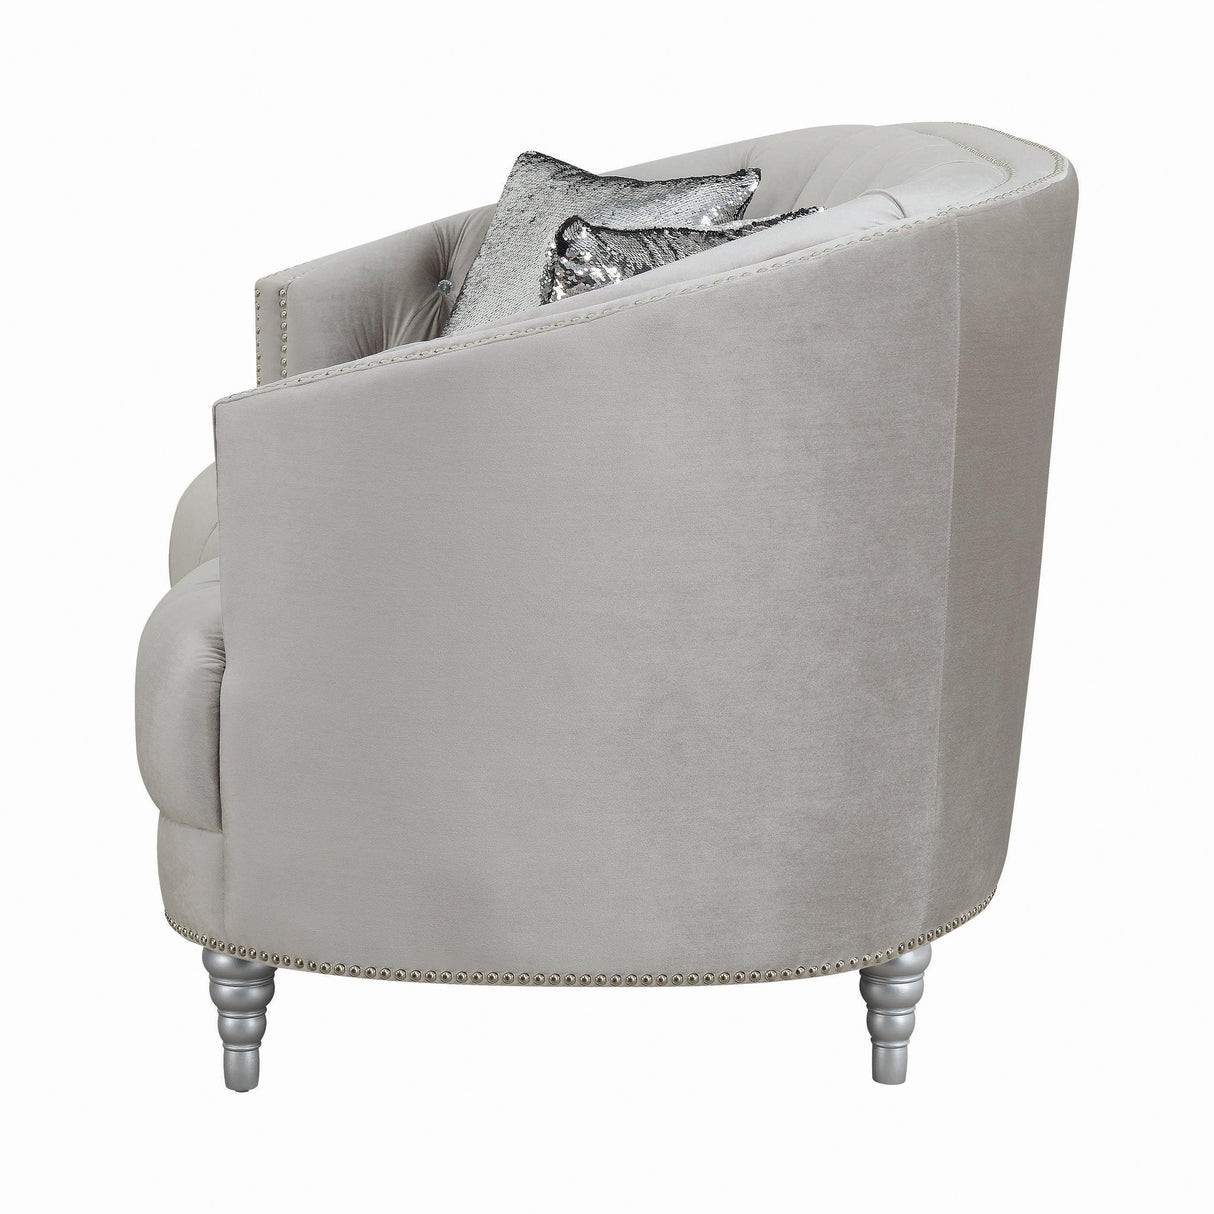 Avonlea Sofa, Loveseat And Chair Grey By Coaster Furniture - Home Elegance USA